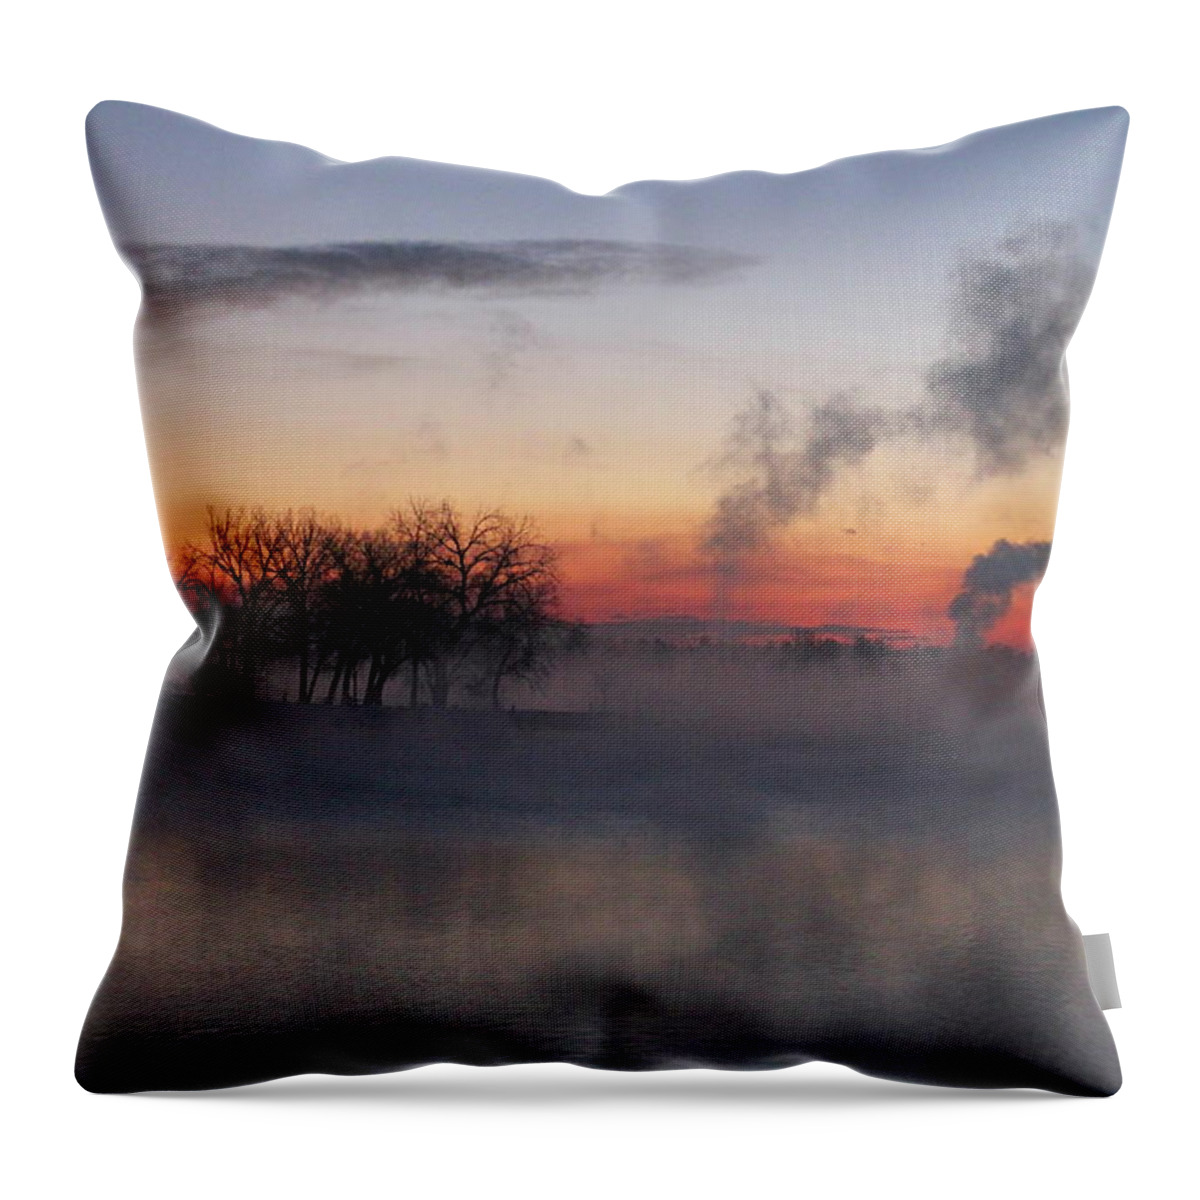 Fog Throw Pillow featuring the photograph Fog On The Lake #1 by Trent Mallett